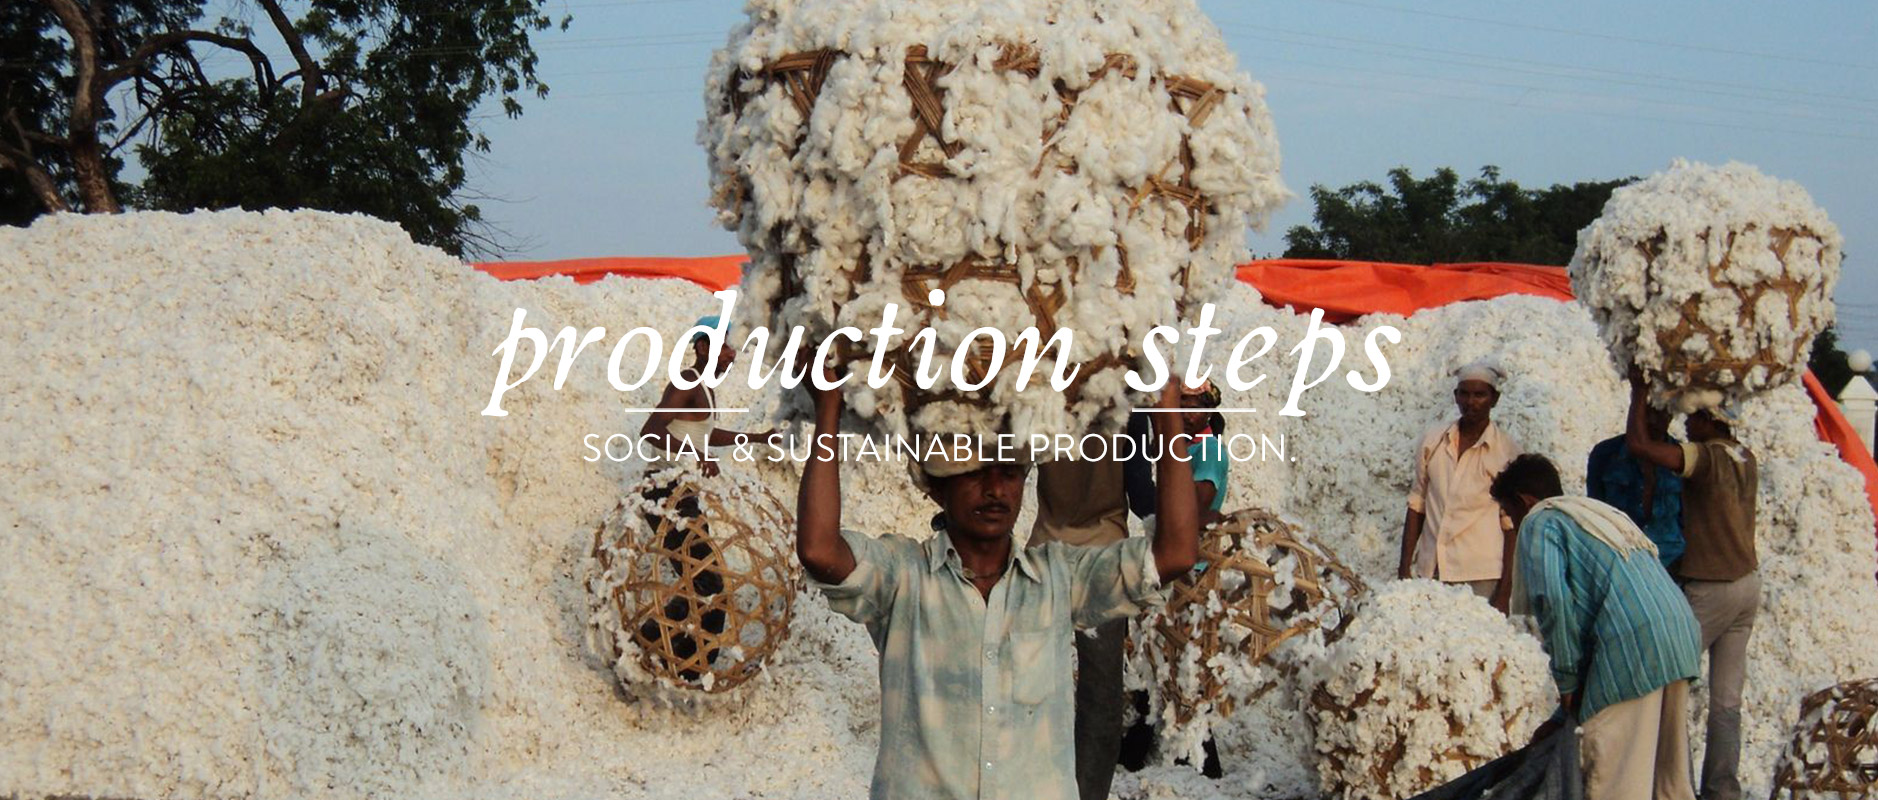 social-sustainable-production-steps